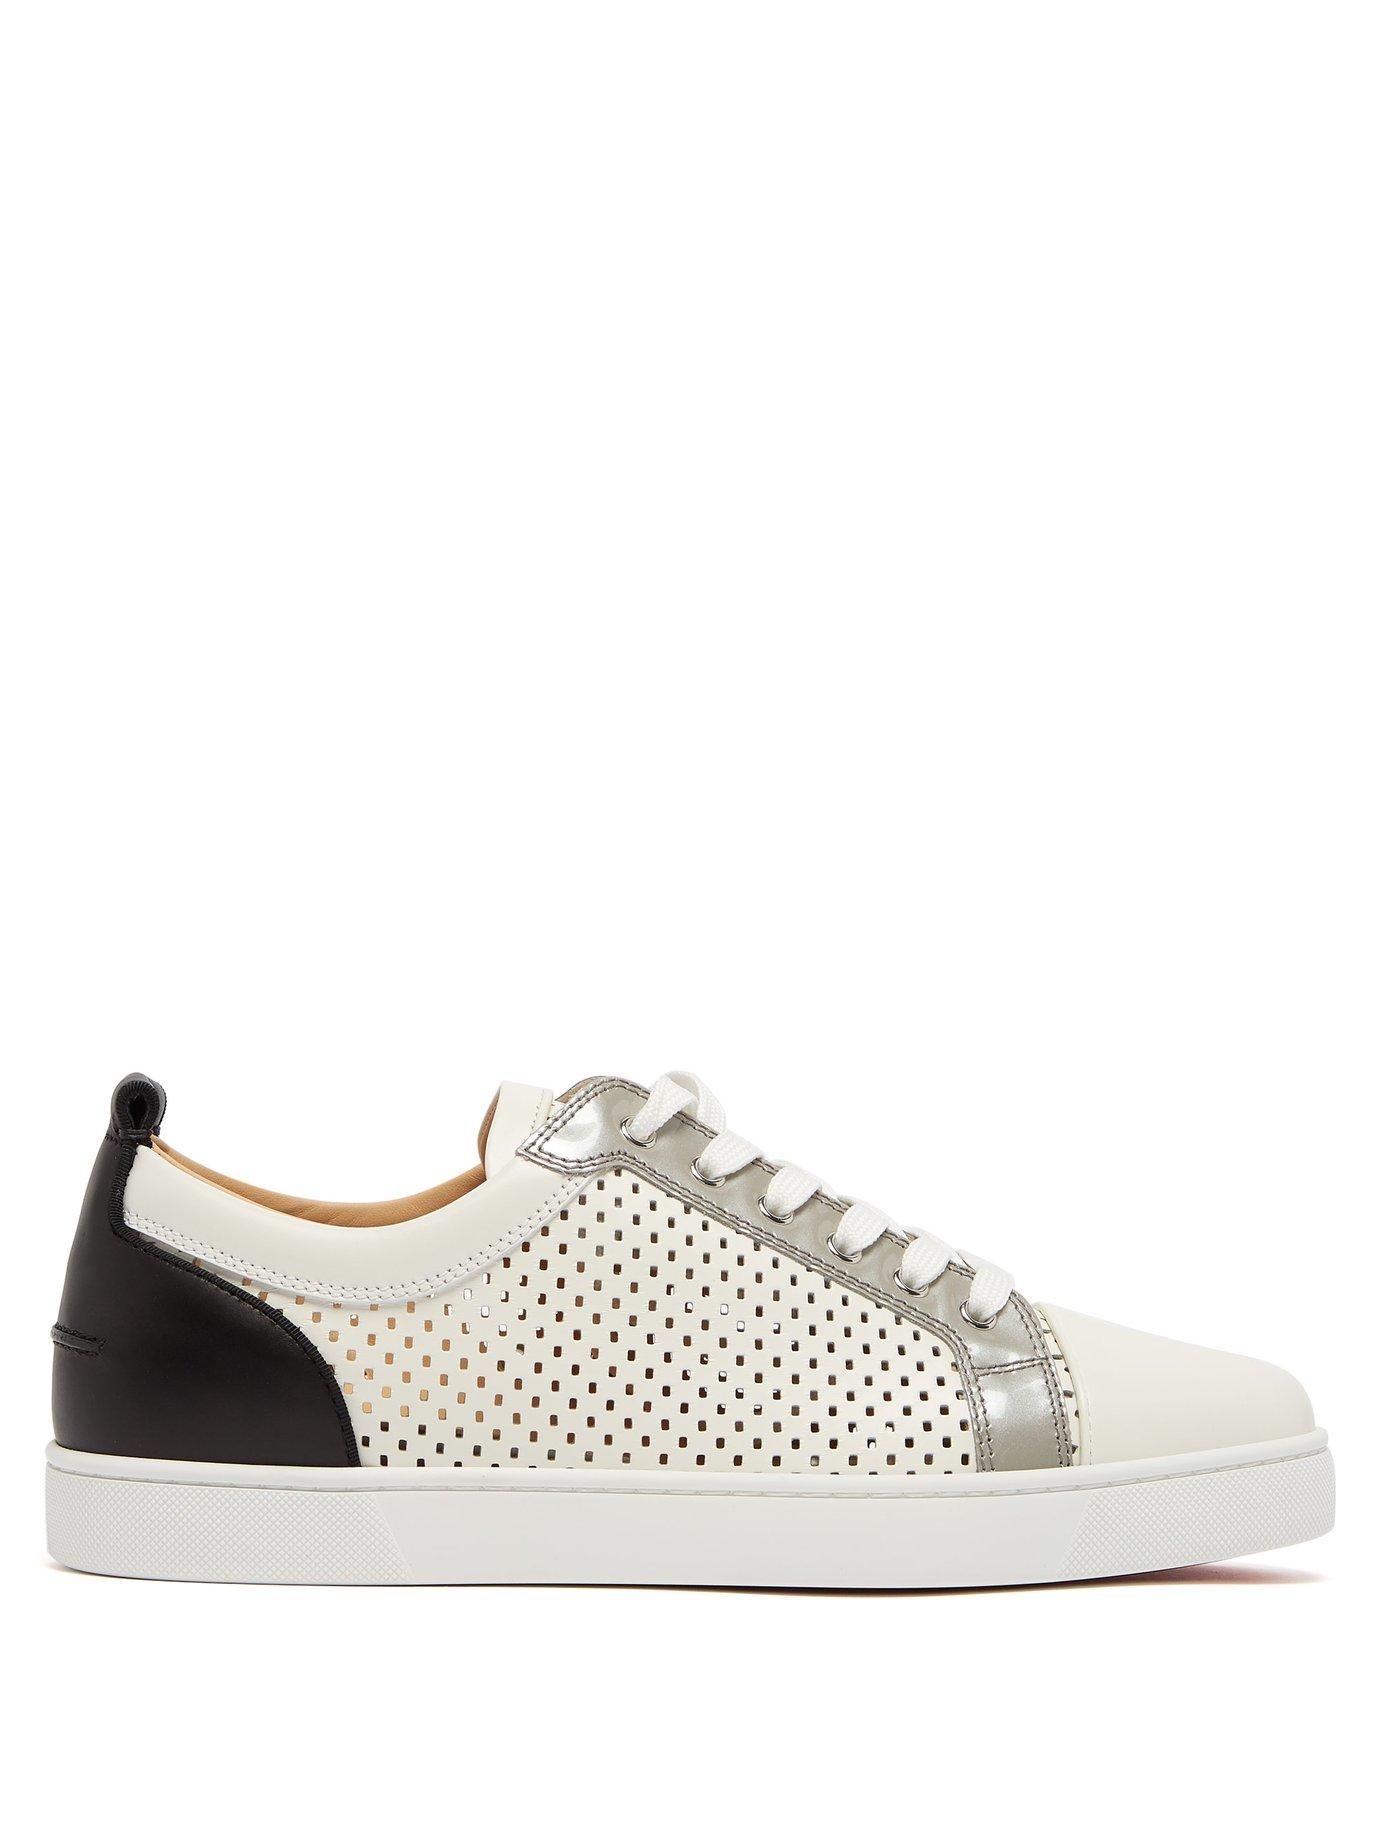 justering Sved Medicin Christian Louboutin Louis Junior Flat Leather Sneakers in White for Men -  Lyst